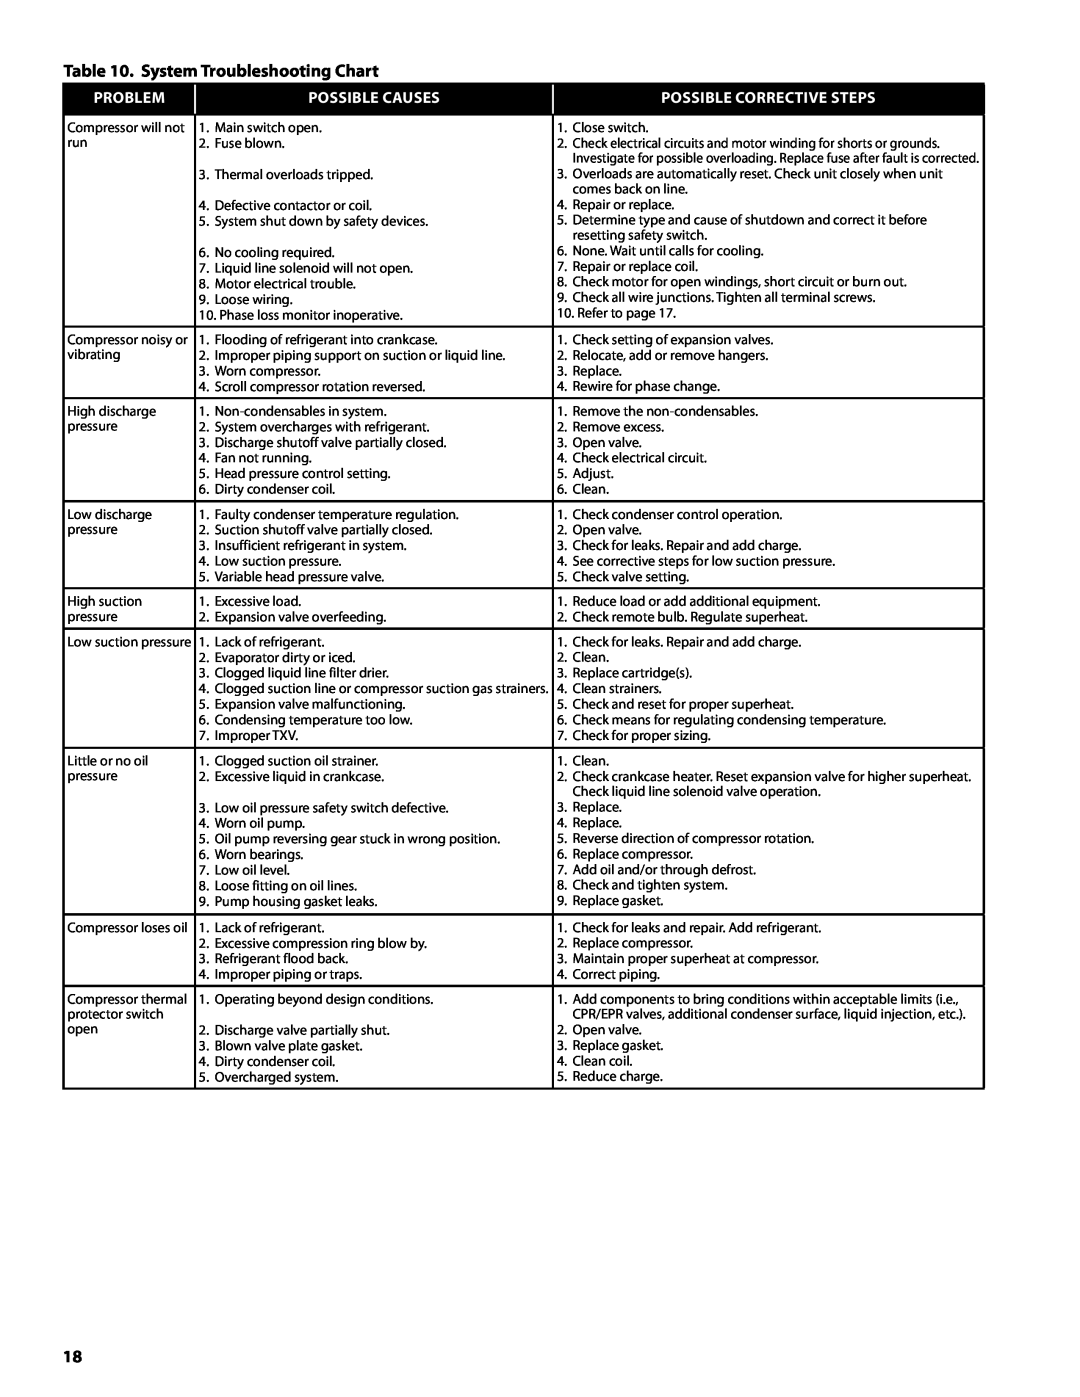 Heatcraft Refrigeration Products H-IM-CU System Troubleshooting Chart, Problem, Possible Causes, Possible Corrective Steps 